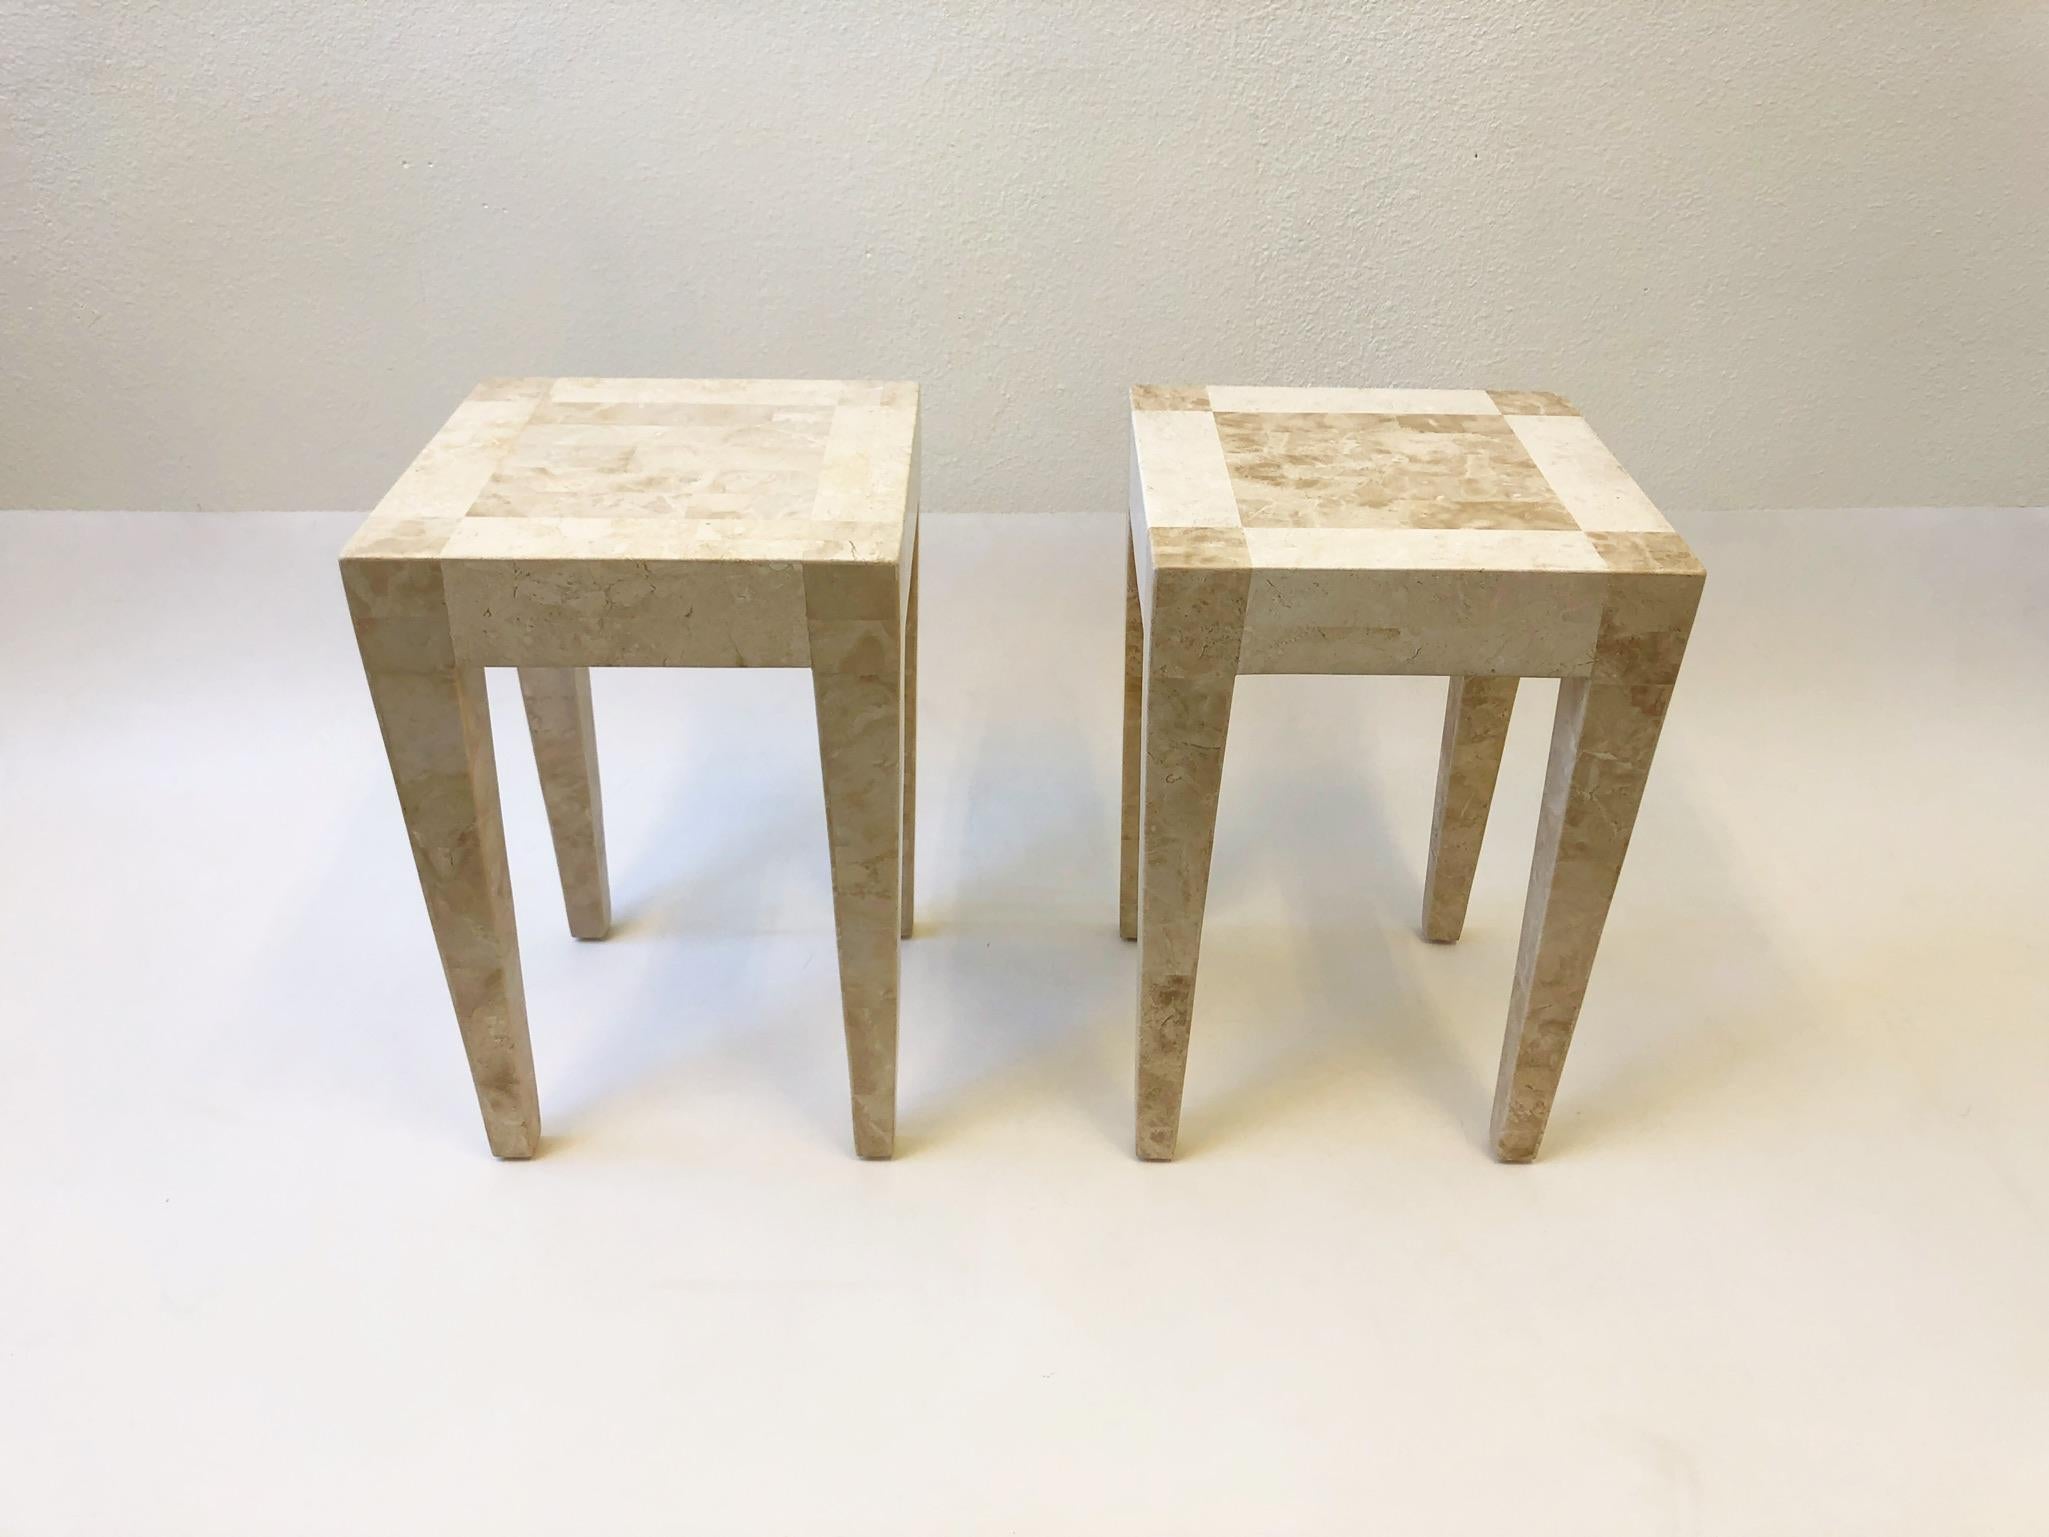 A beautiful pair of travertine and marble side tables, design by Maitland Smith in the 1980s. One table is darker then the other. The table are constructed of wood with a travertine and marble veneer.
Dimensions: 14” wide 14” deep 21.25” high.